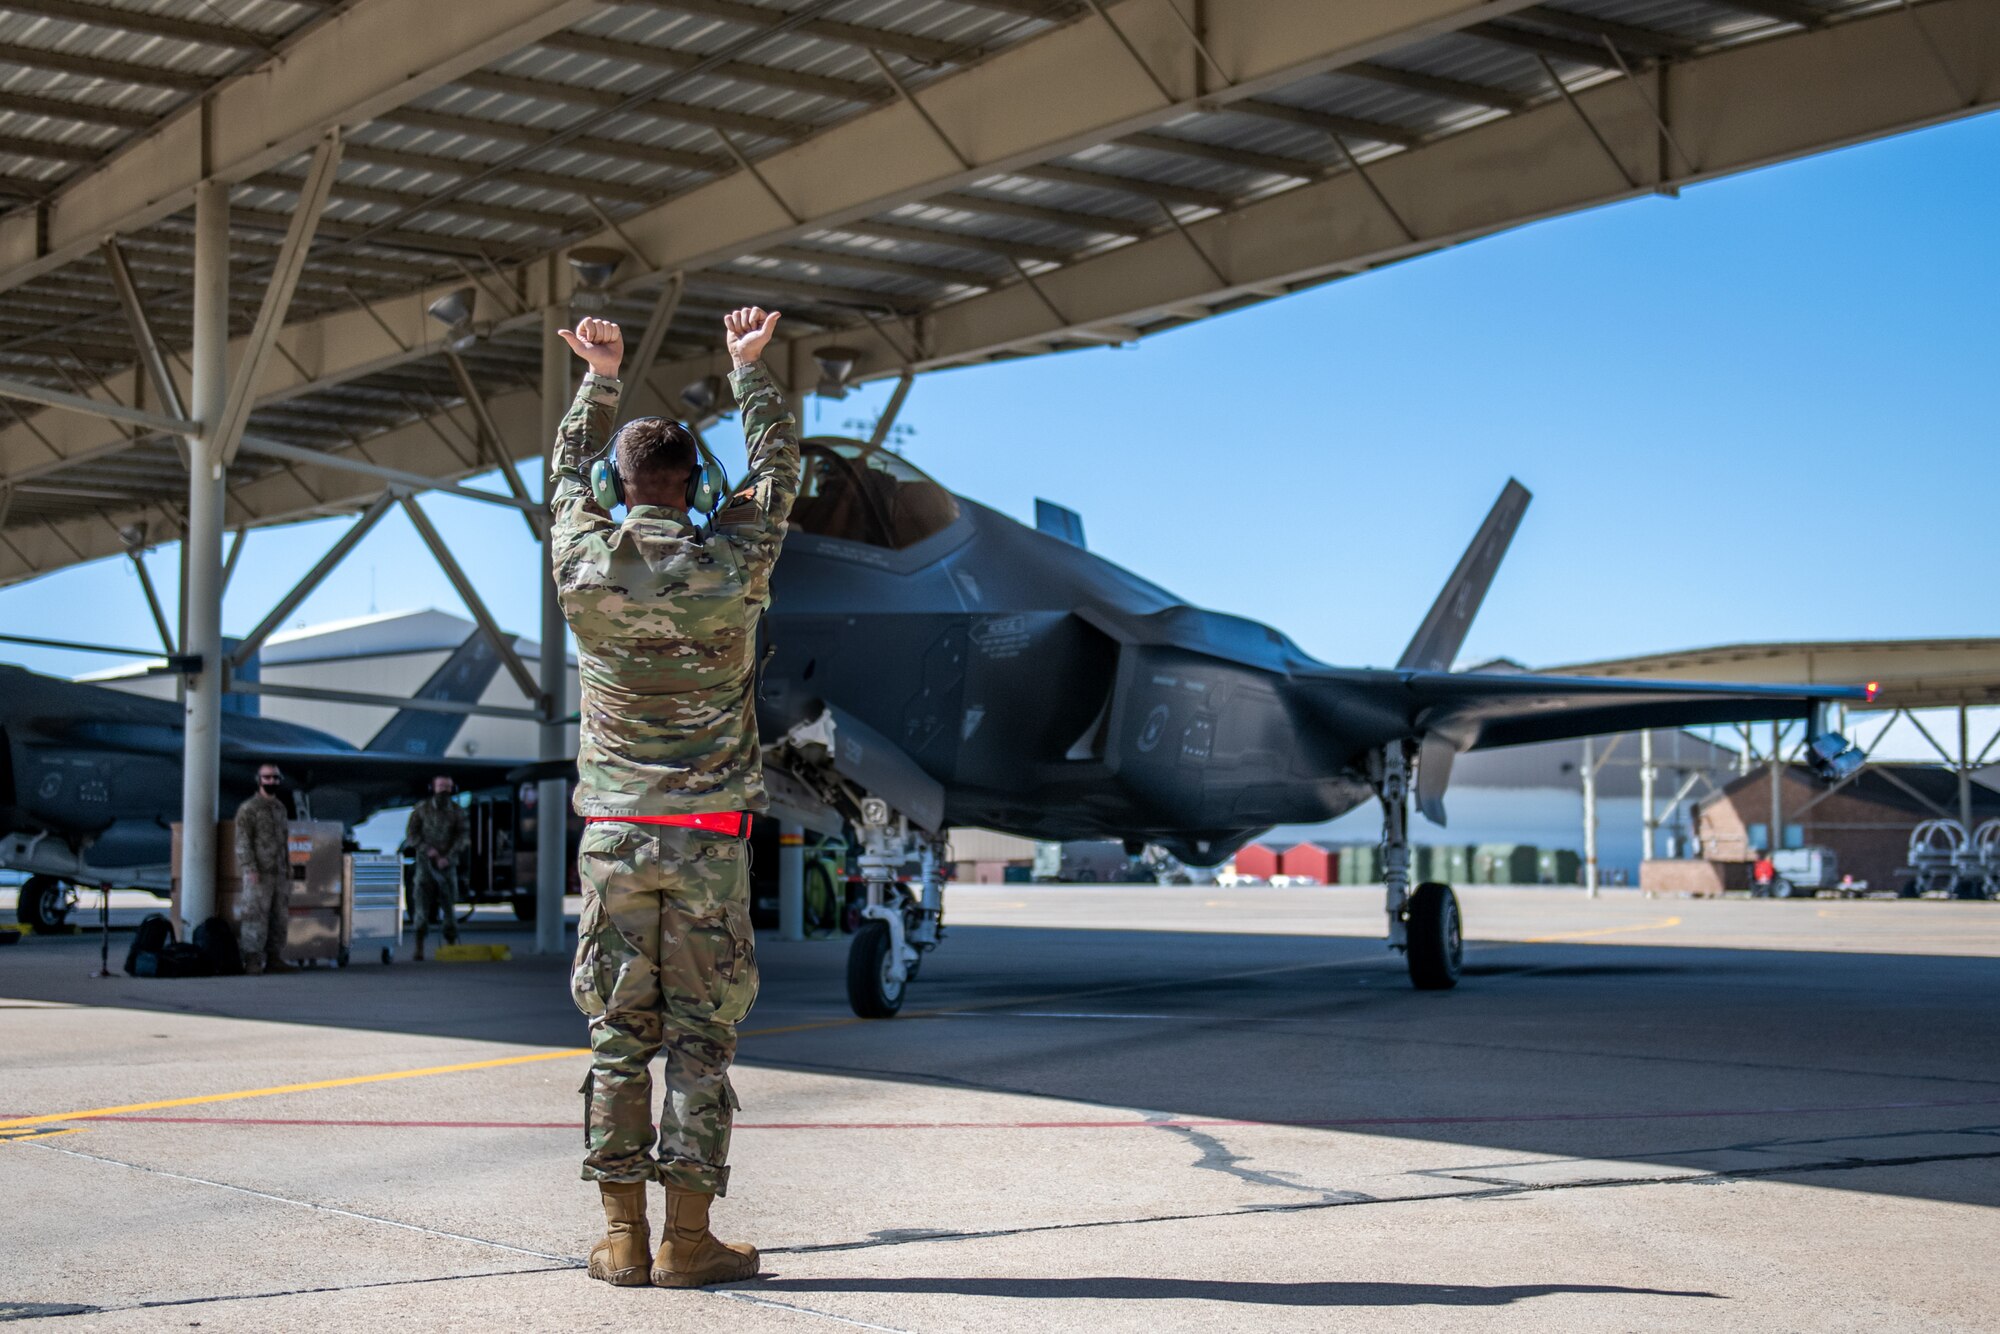 Senior Airman Thomas Rich, a crew chief in the 419th Aircraft Maintenance Squadron, signals to an F-35A Lightning II pilot during launch procedures April 10 at Hill Air Force Base, Utah.